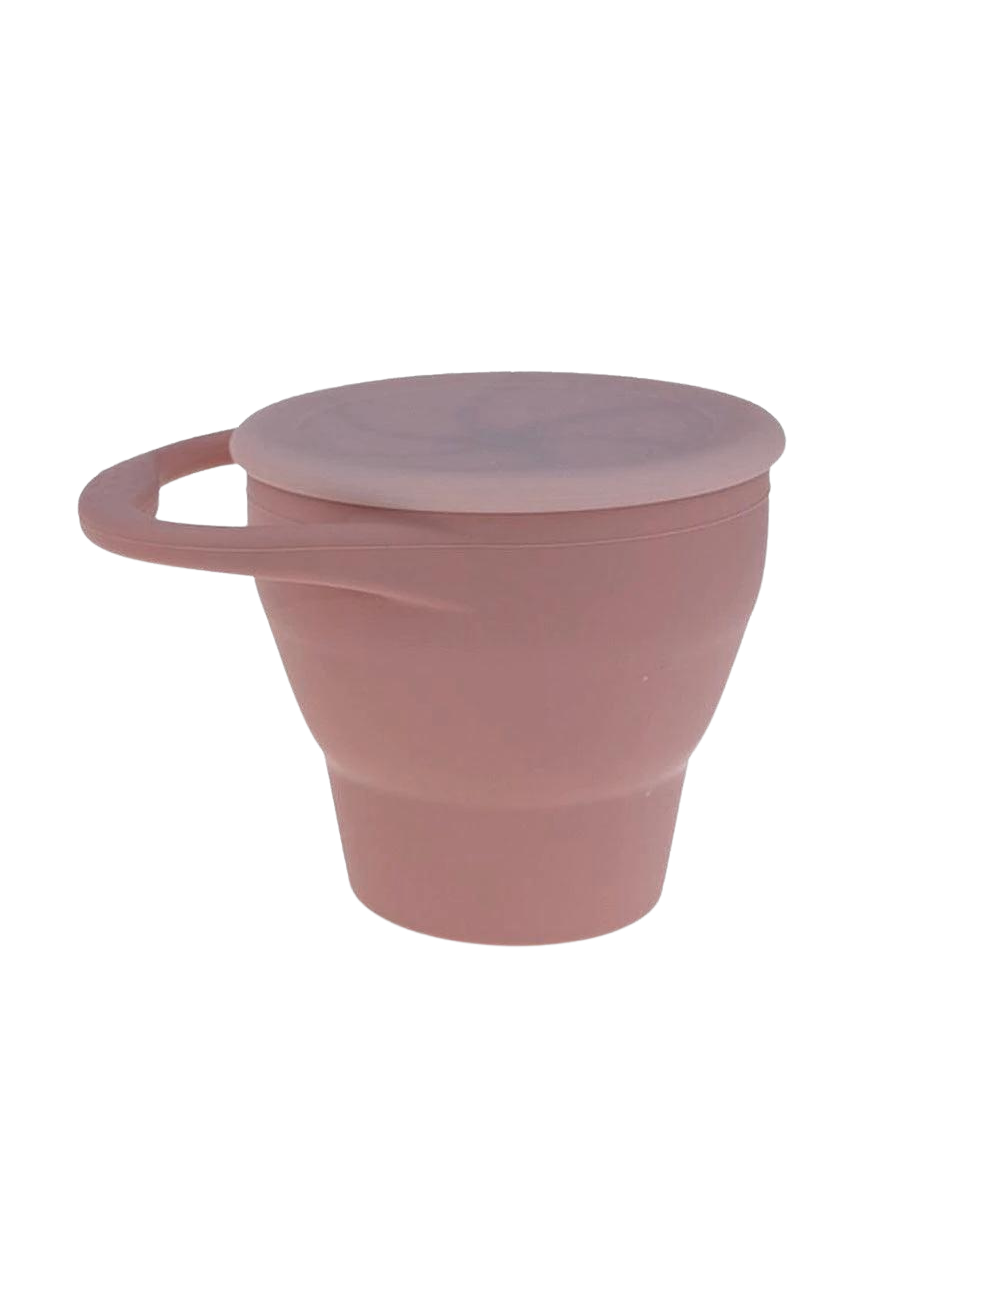 Rose Collapsible Silicone Snack Pot